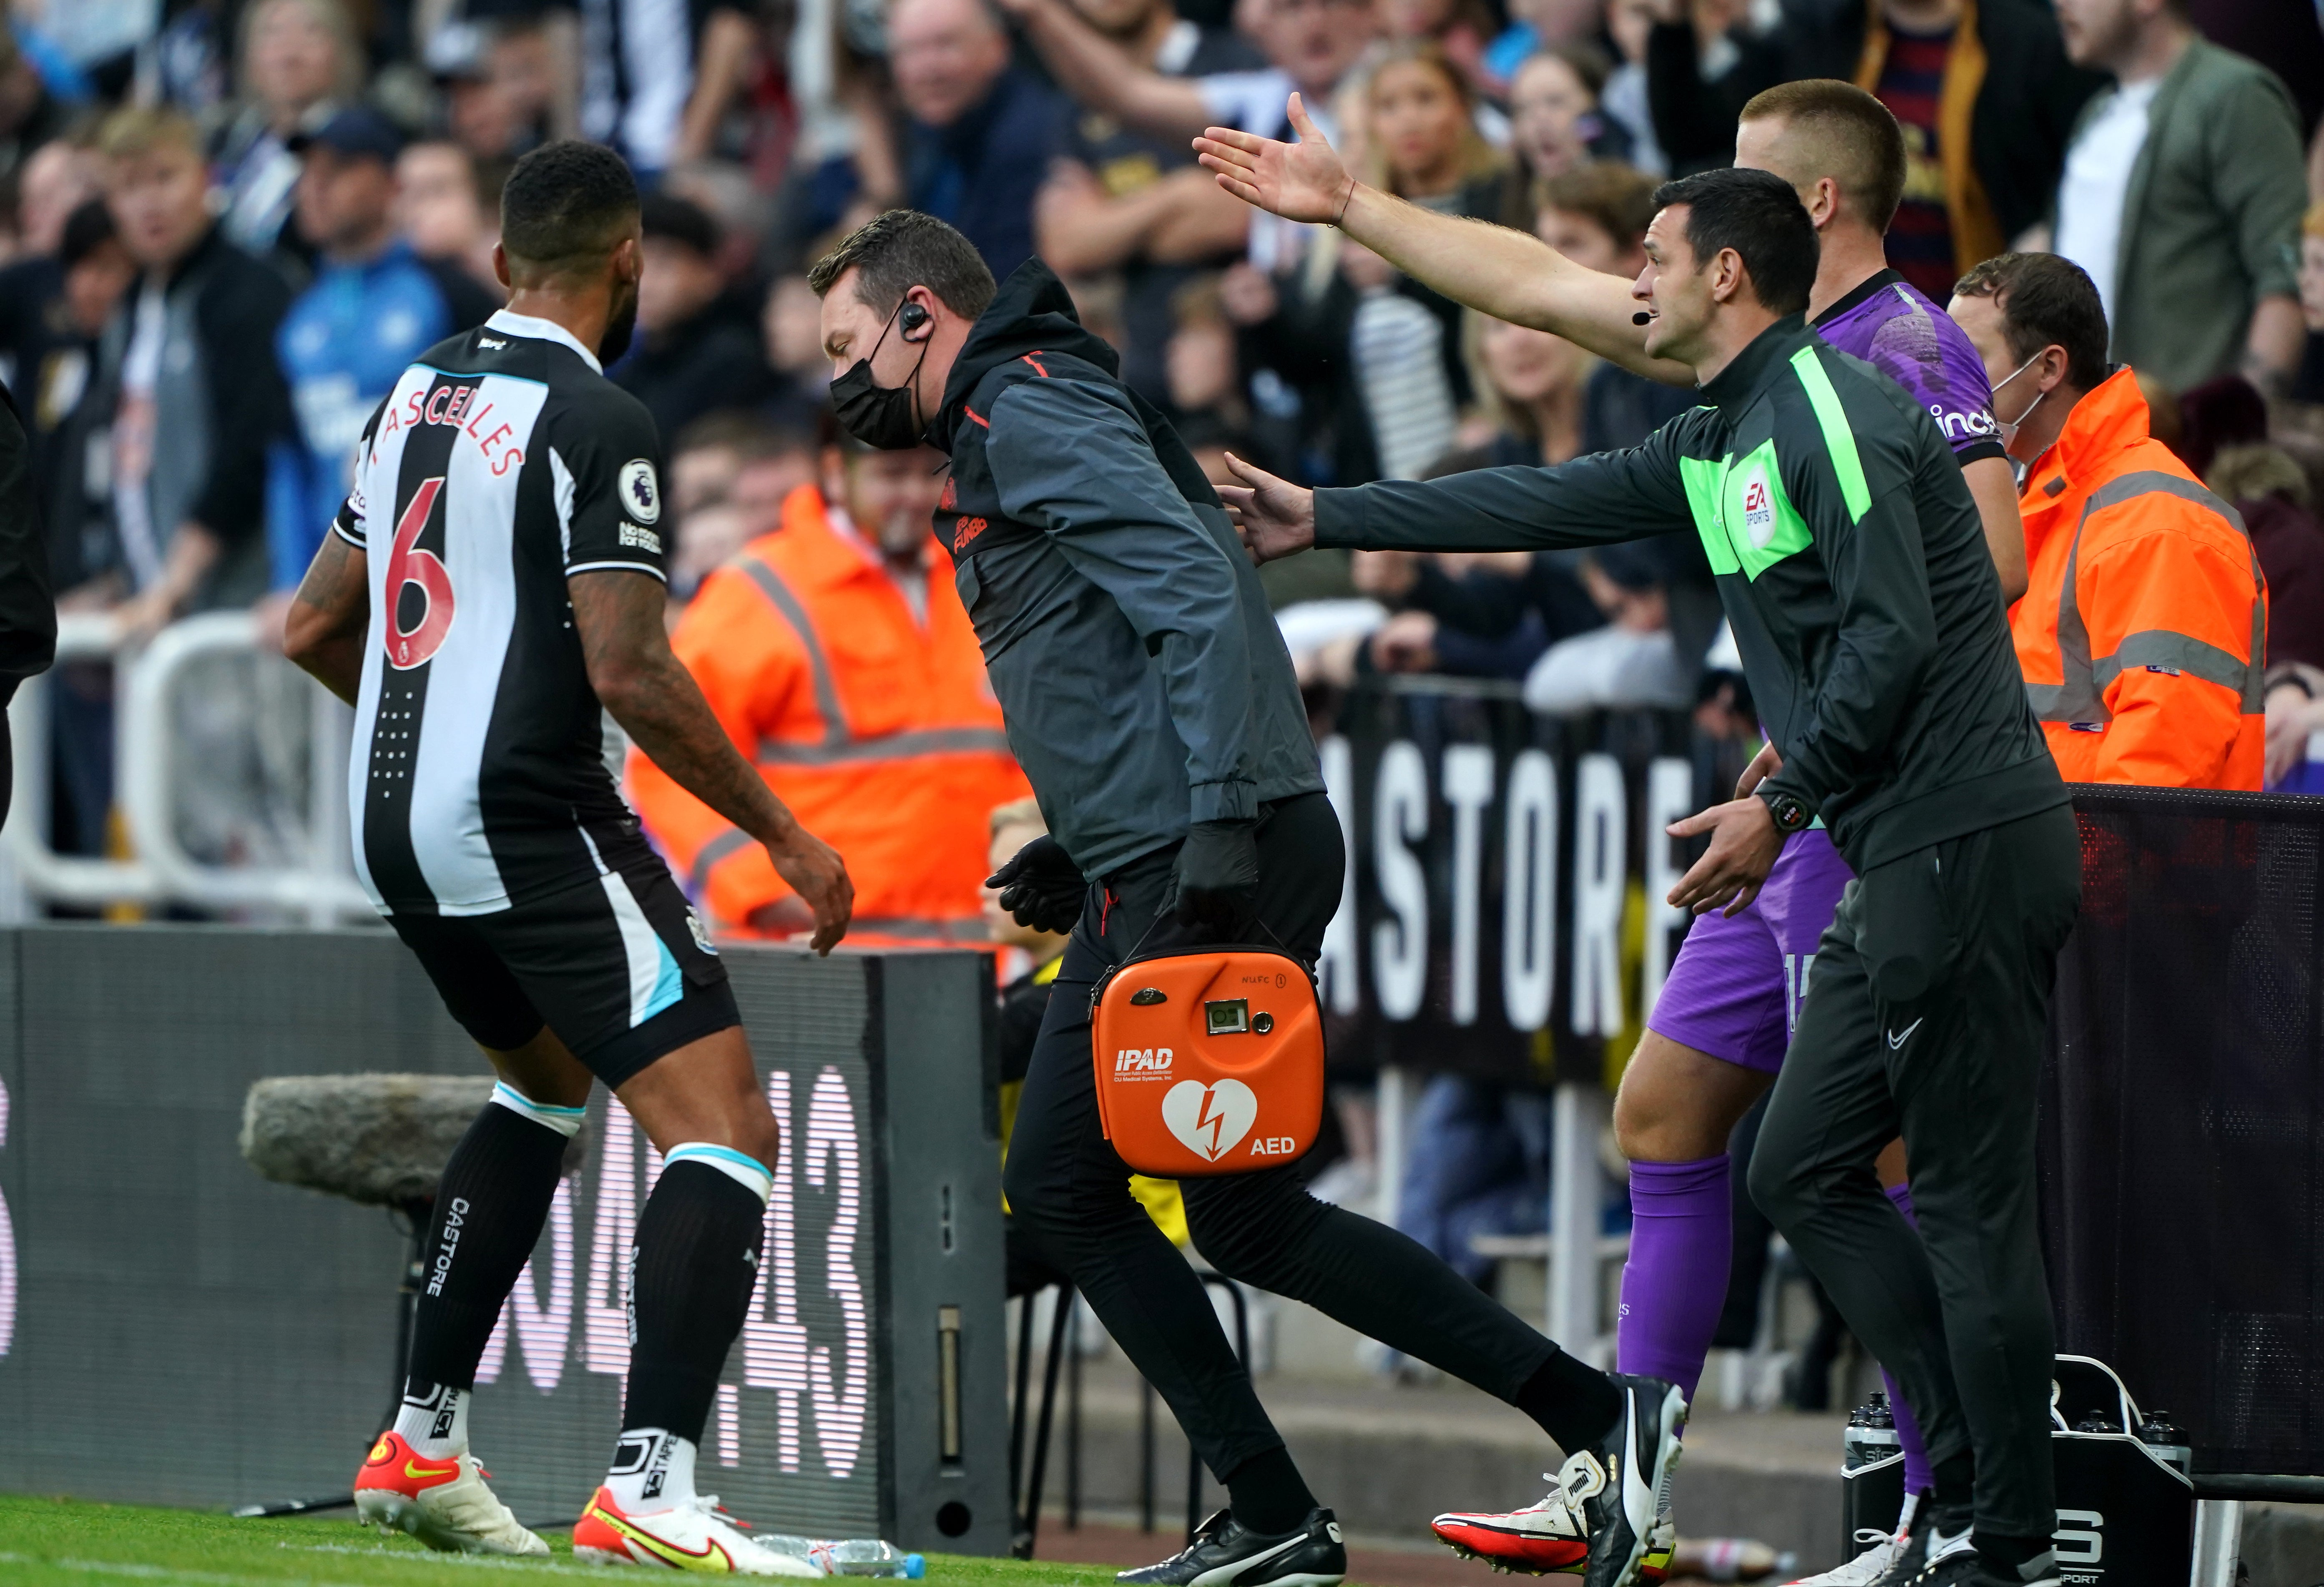 Newcastle United club doctor Paul Catterson (centre) was sent to attend to a fan who had taken ill in the stands (Owen Humphreys/PA)